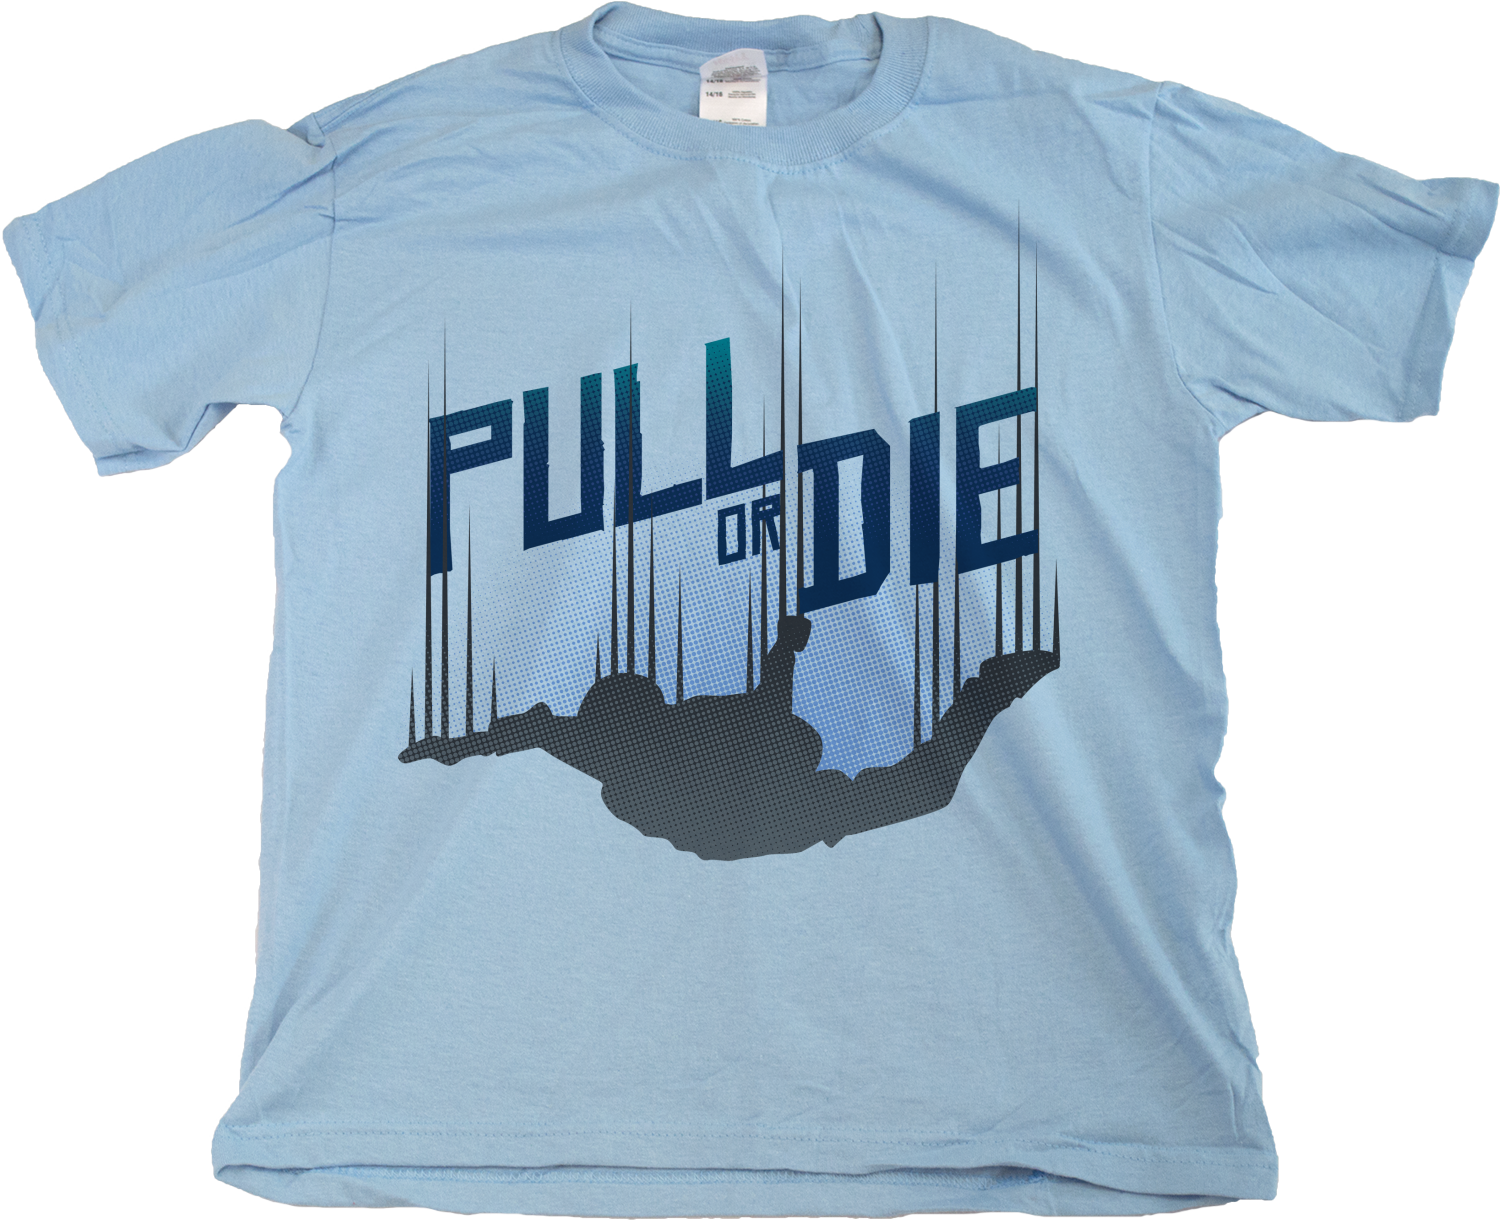 Youth Light Blue Pull Or Die - Skydiving Parachute Extreme Sports Funny Humor T-shirt